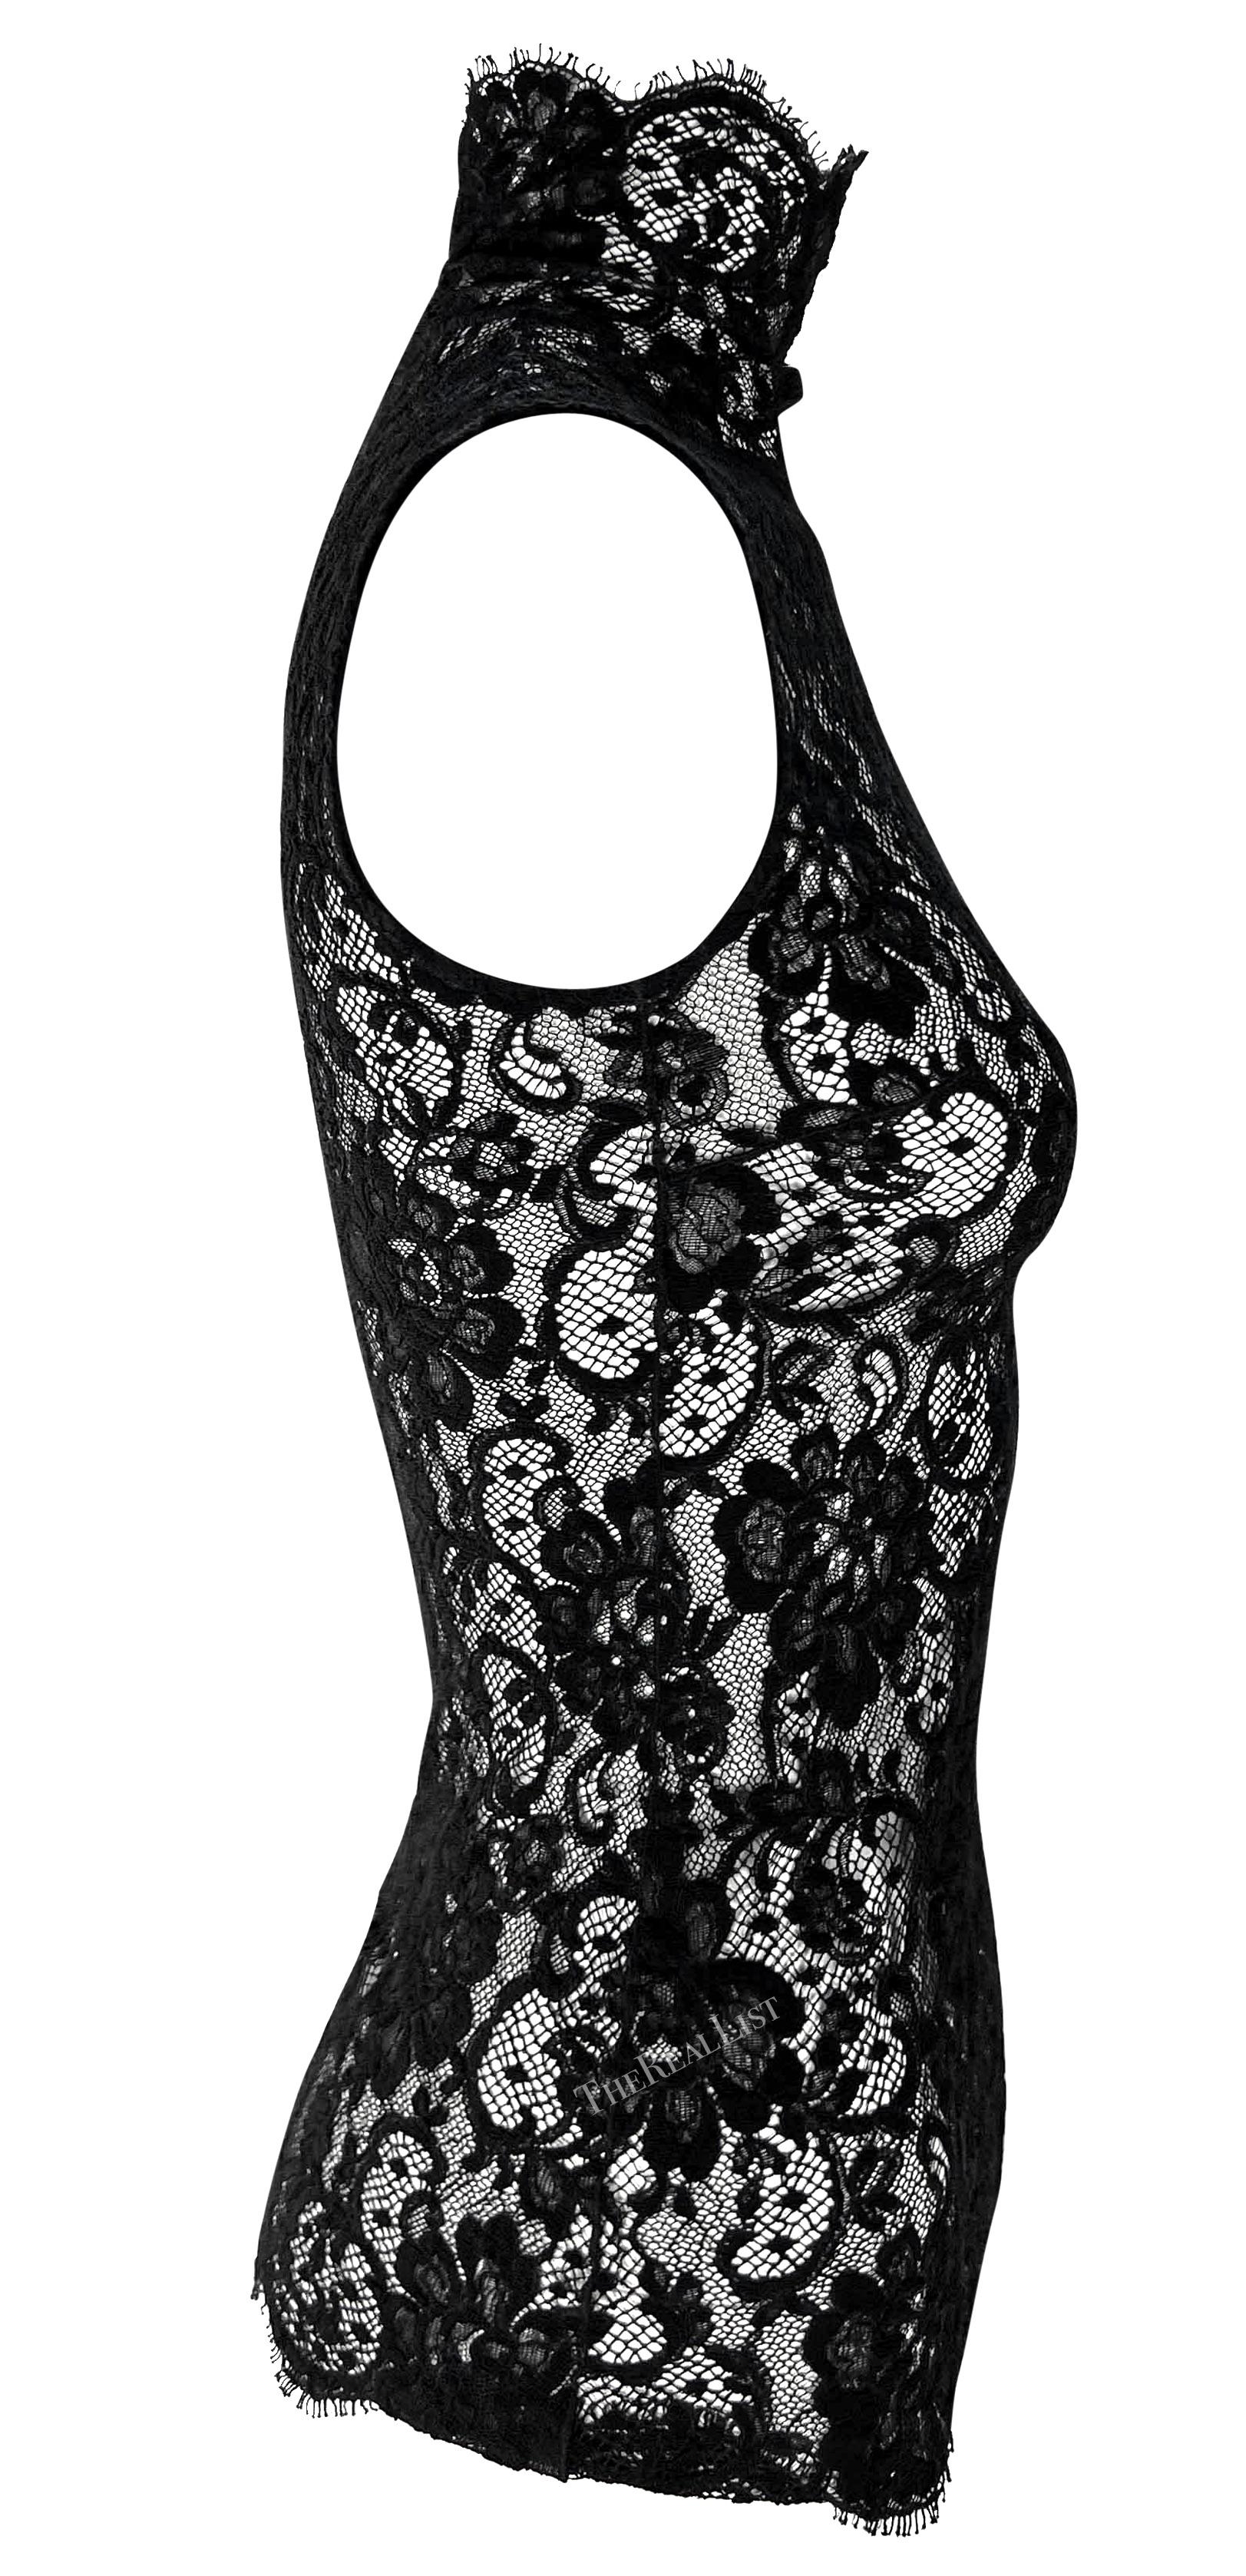 F/W 2002 Dolce & Gabbana Sheer Lace Black Mock Neck Sleeveless Top For Sale 2